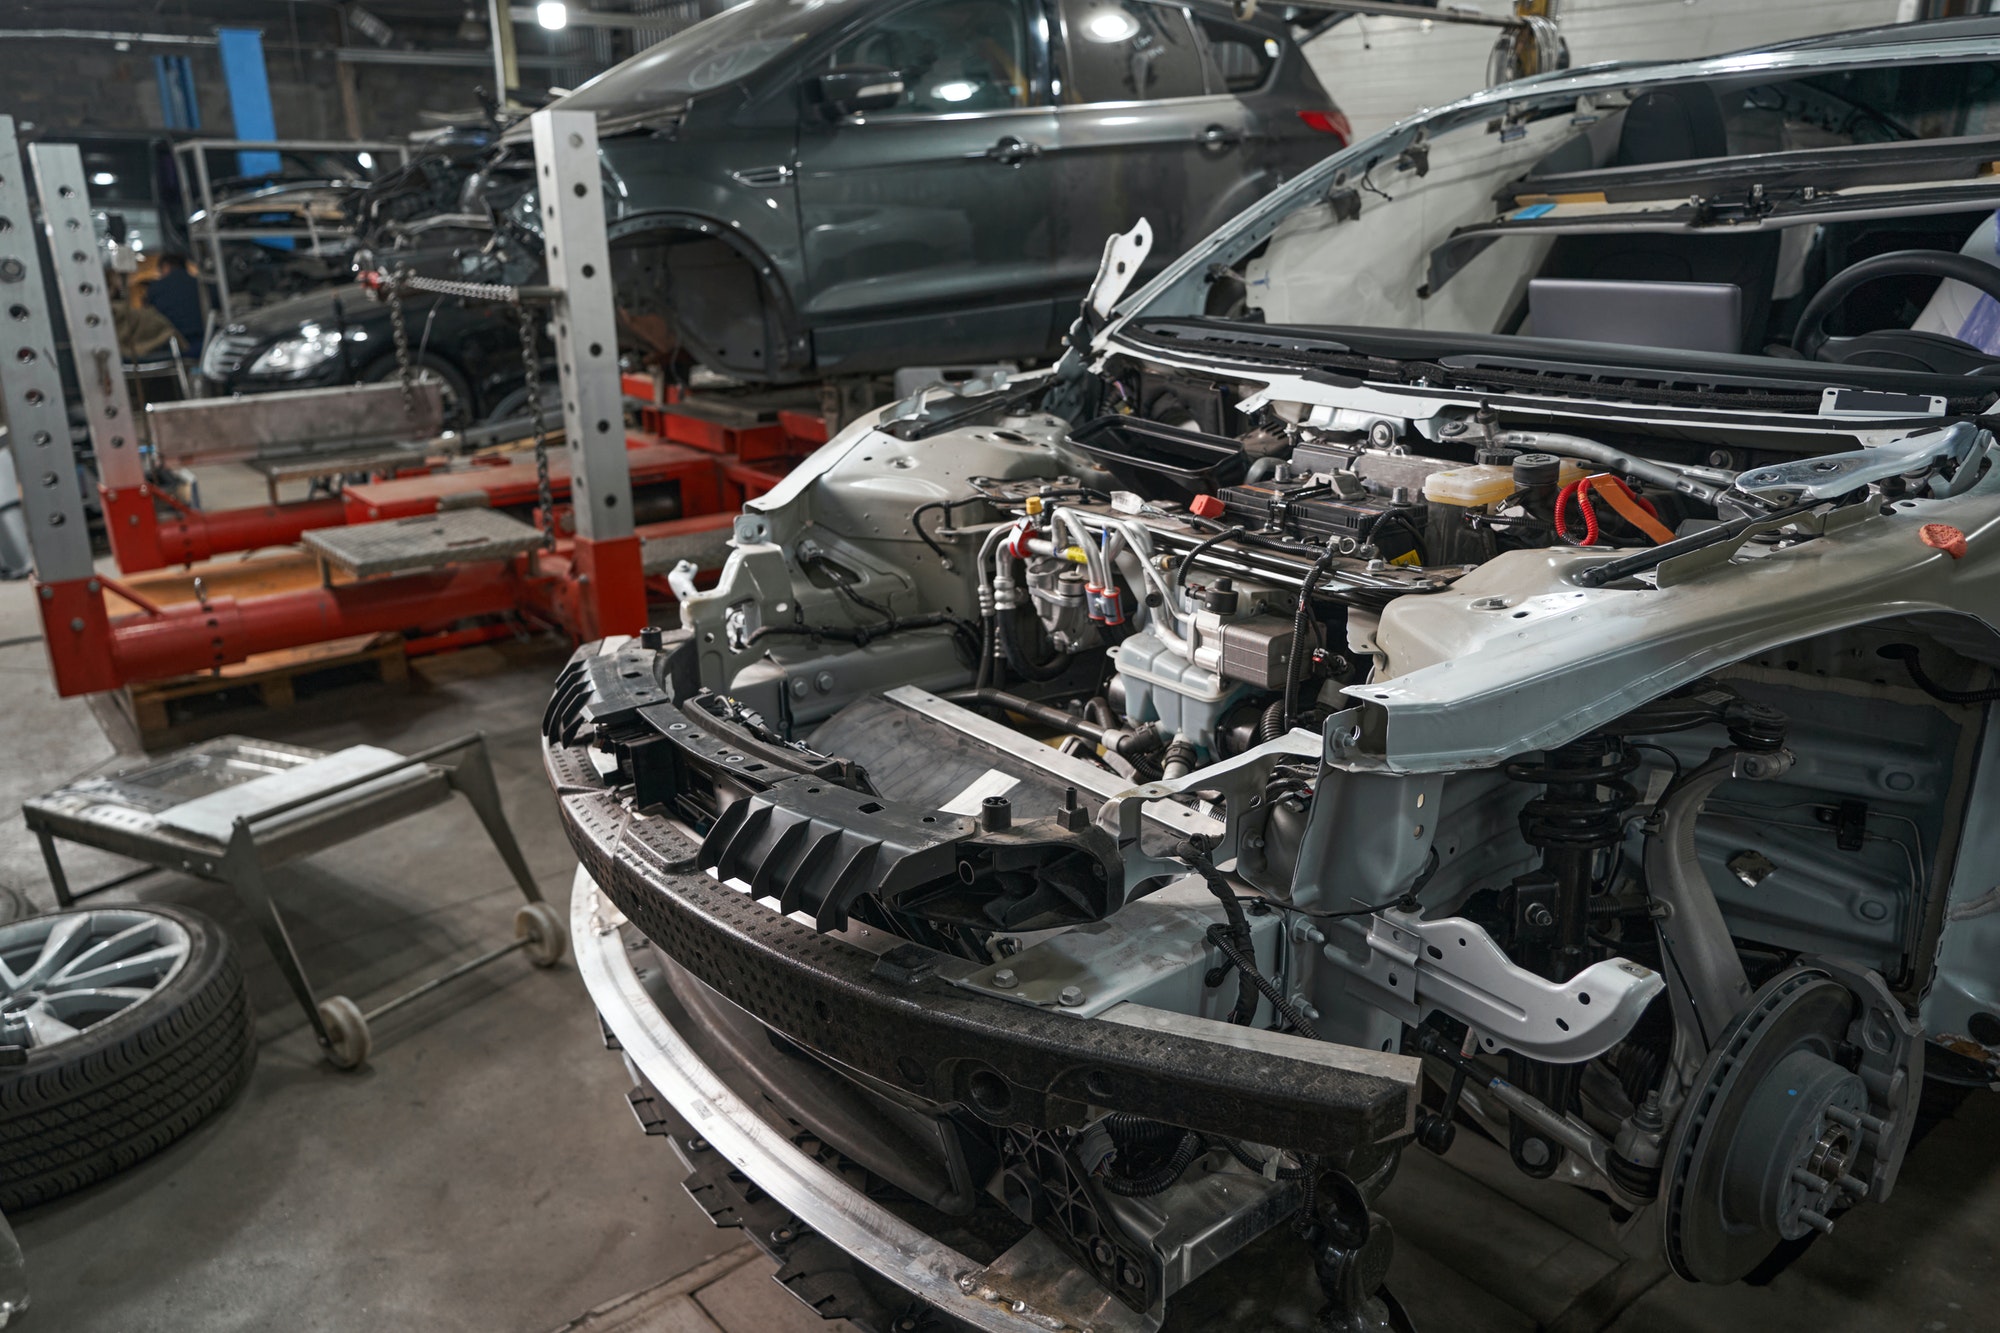 Disassembled car parts during repairs in service center